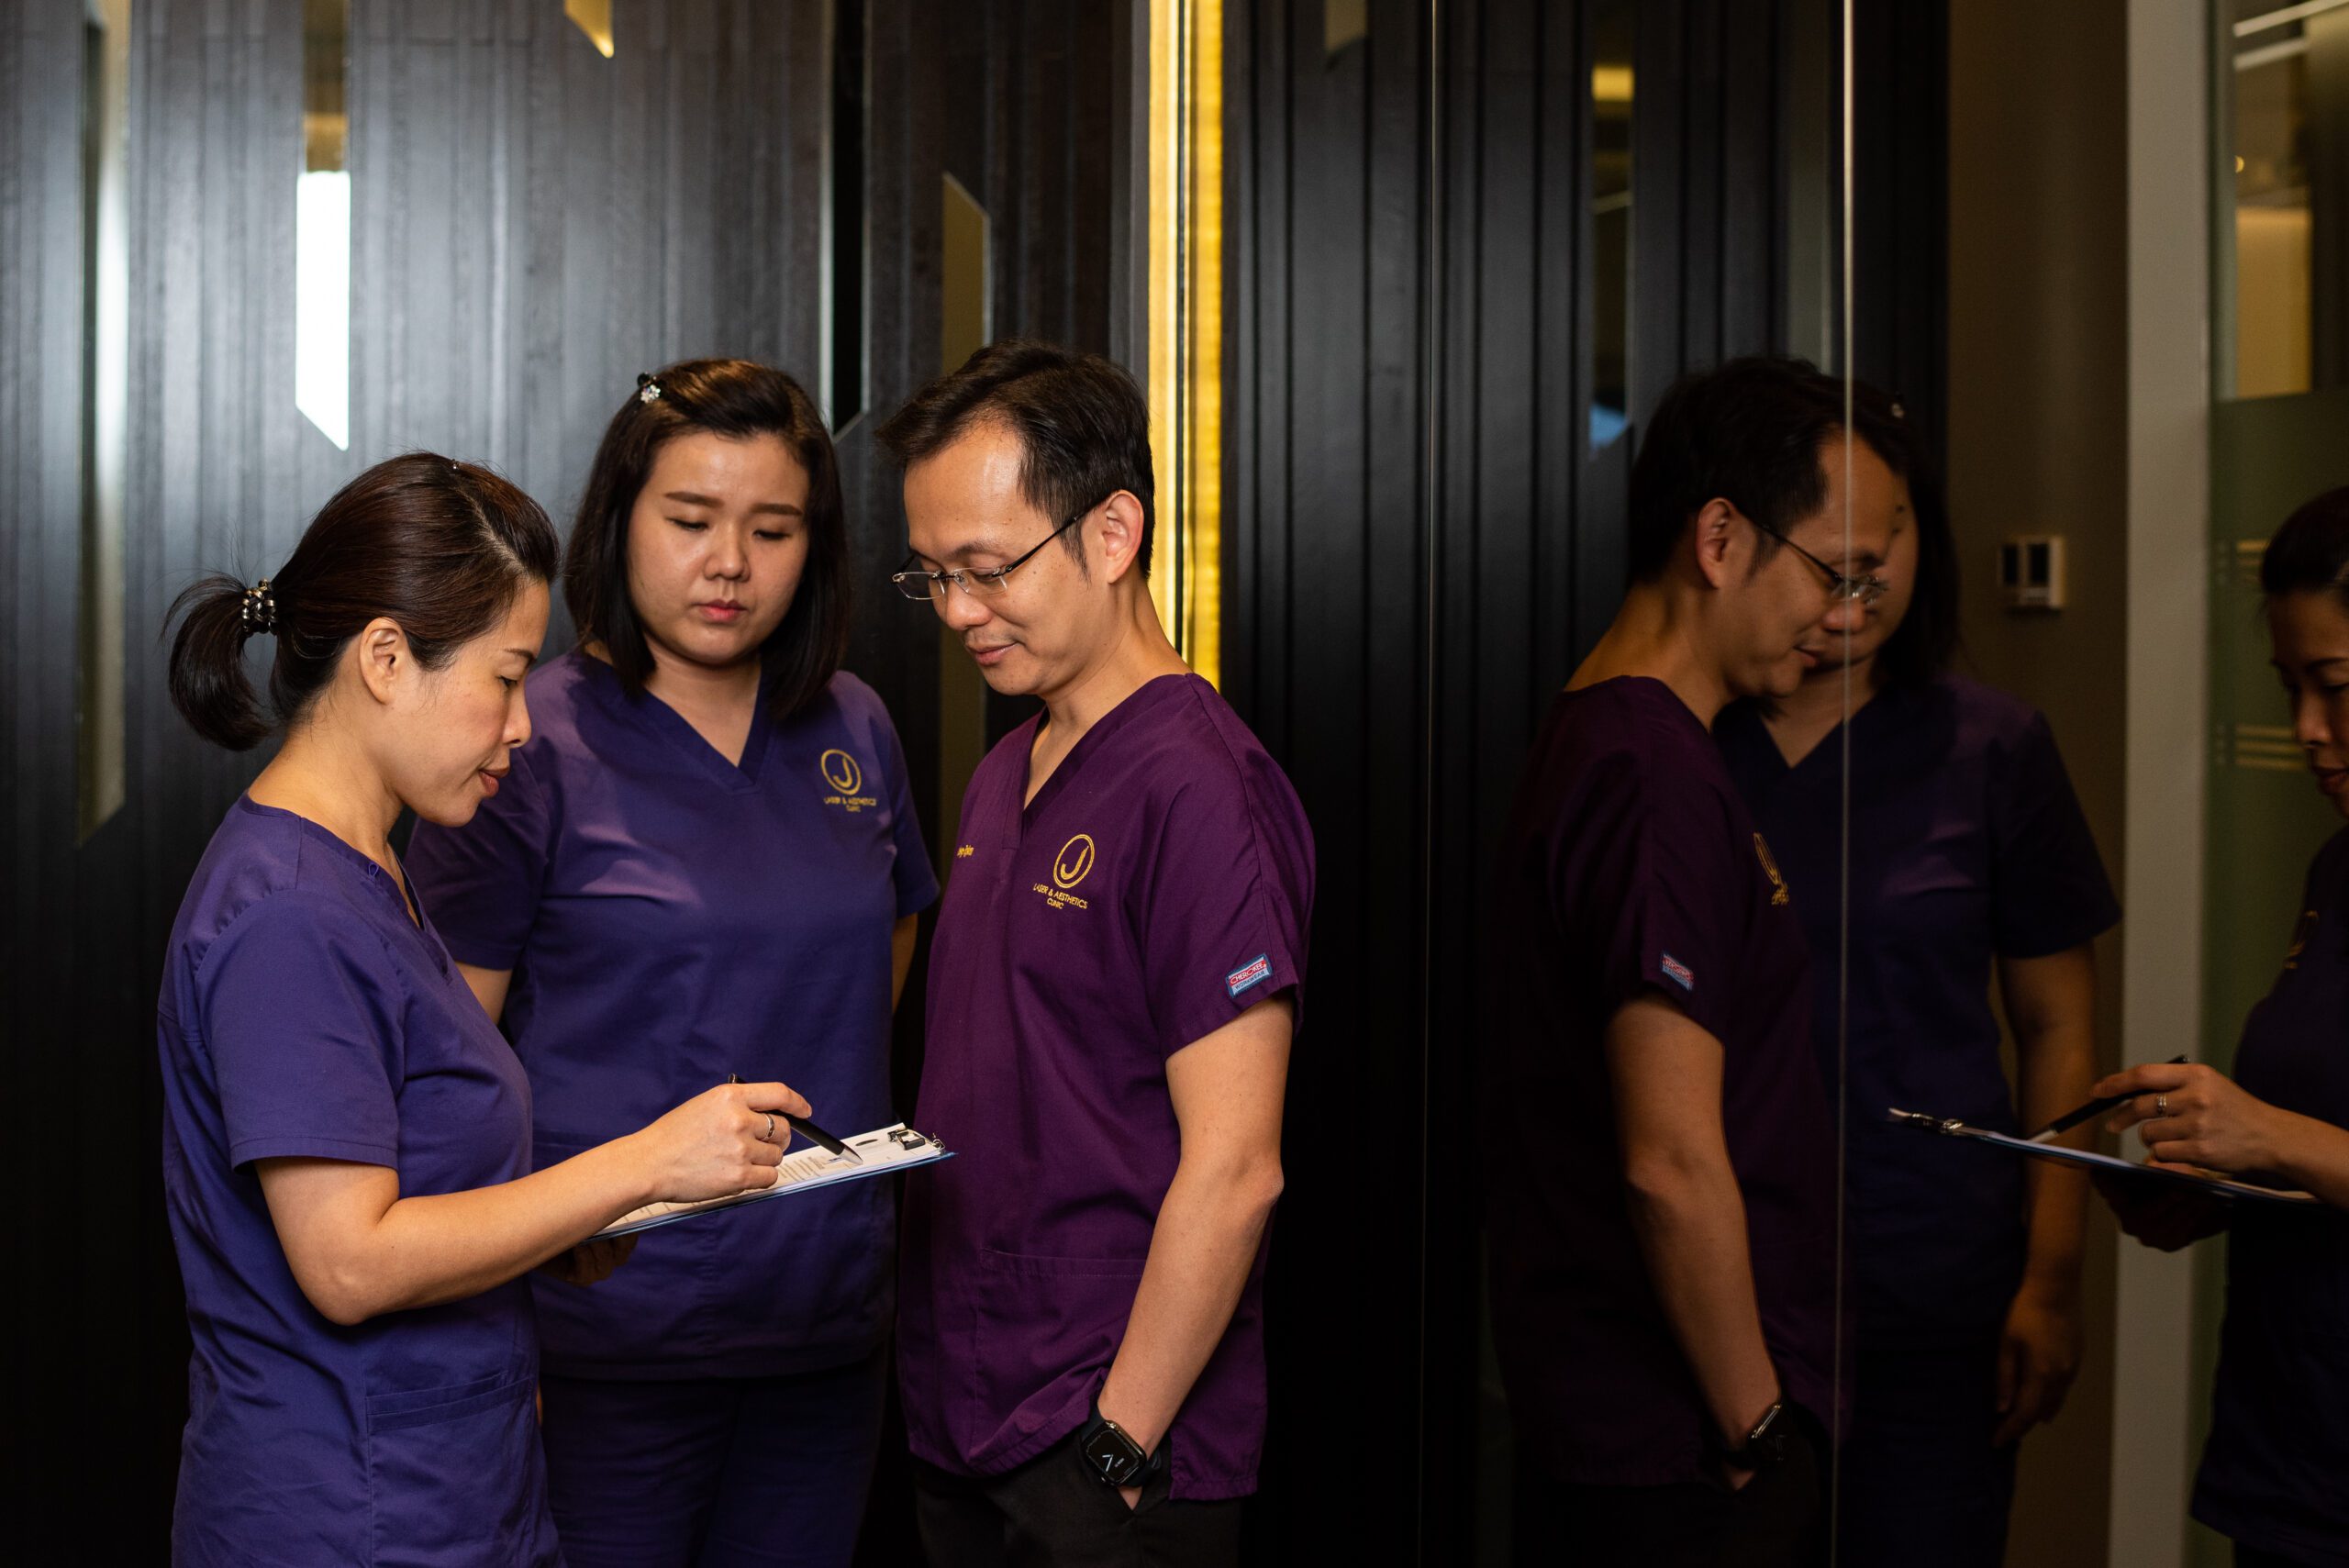 teleconsultation and aesthetic doctor ngiam juzheng with 2 team members near the mirror dressed in clinic uniforms